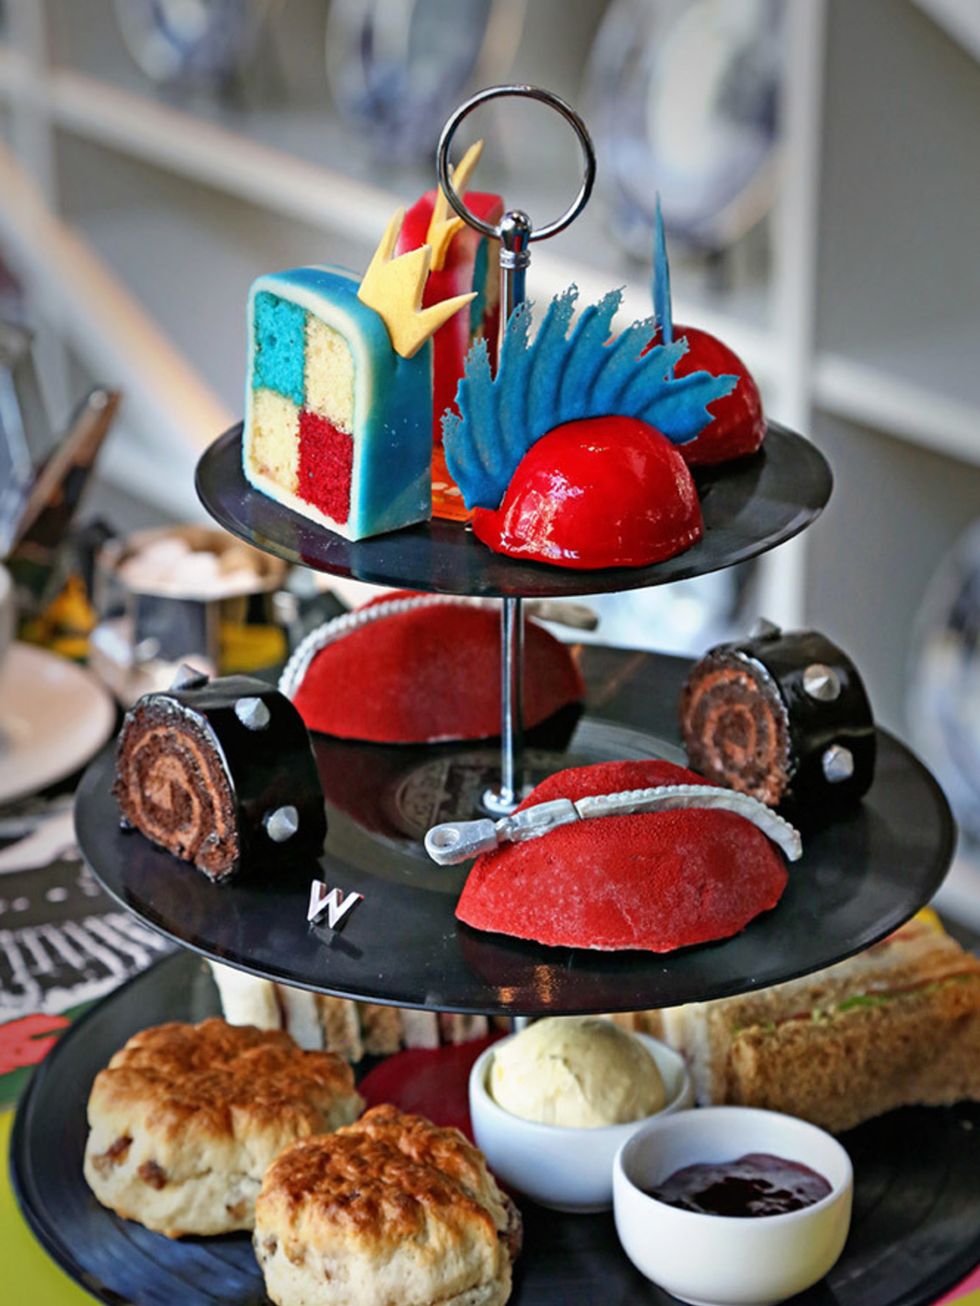 <p>FOOD: <a href="http://www.wlondon.co.uk" target="_blank">Anarch-Tea at W London</a></p>

<p>When Johnny Rotten sang God Save the Queen, he was aiming to spark societal revolution. Didnt quite work (happy 90th, Maam), but as a pleasing alternative, 